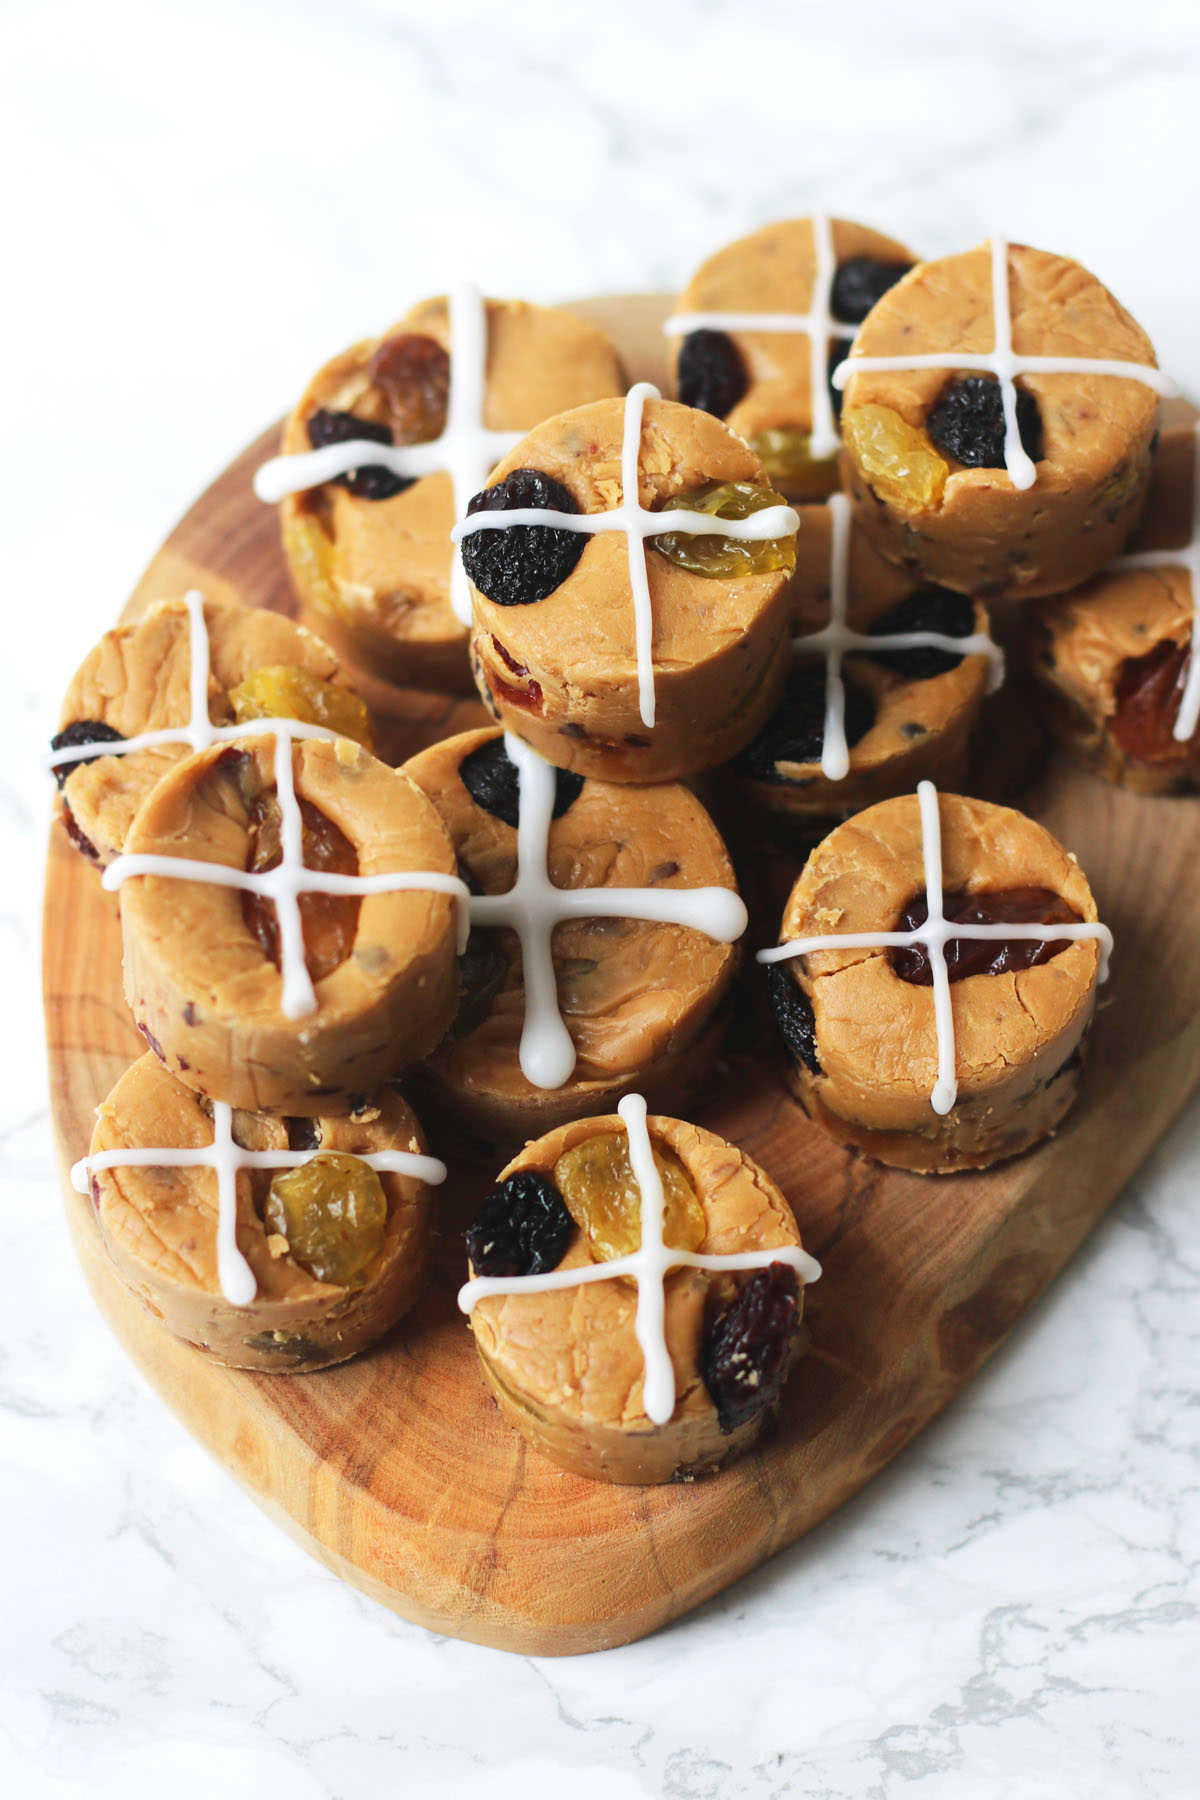 Hot Cross fudge, made with cinnamon, saffron, and dried fruit.